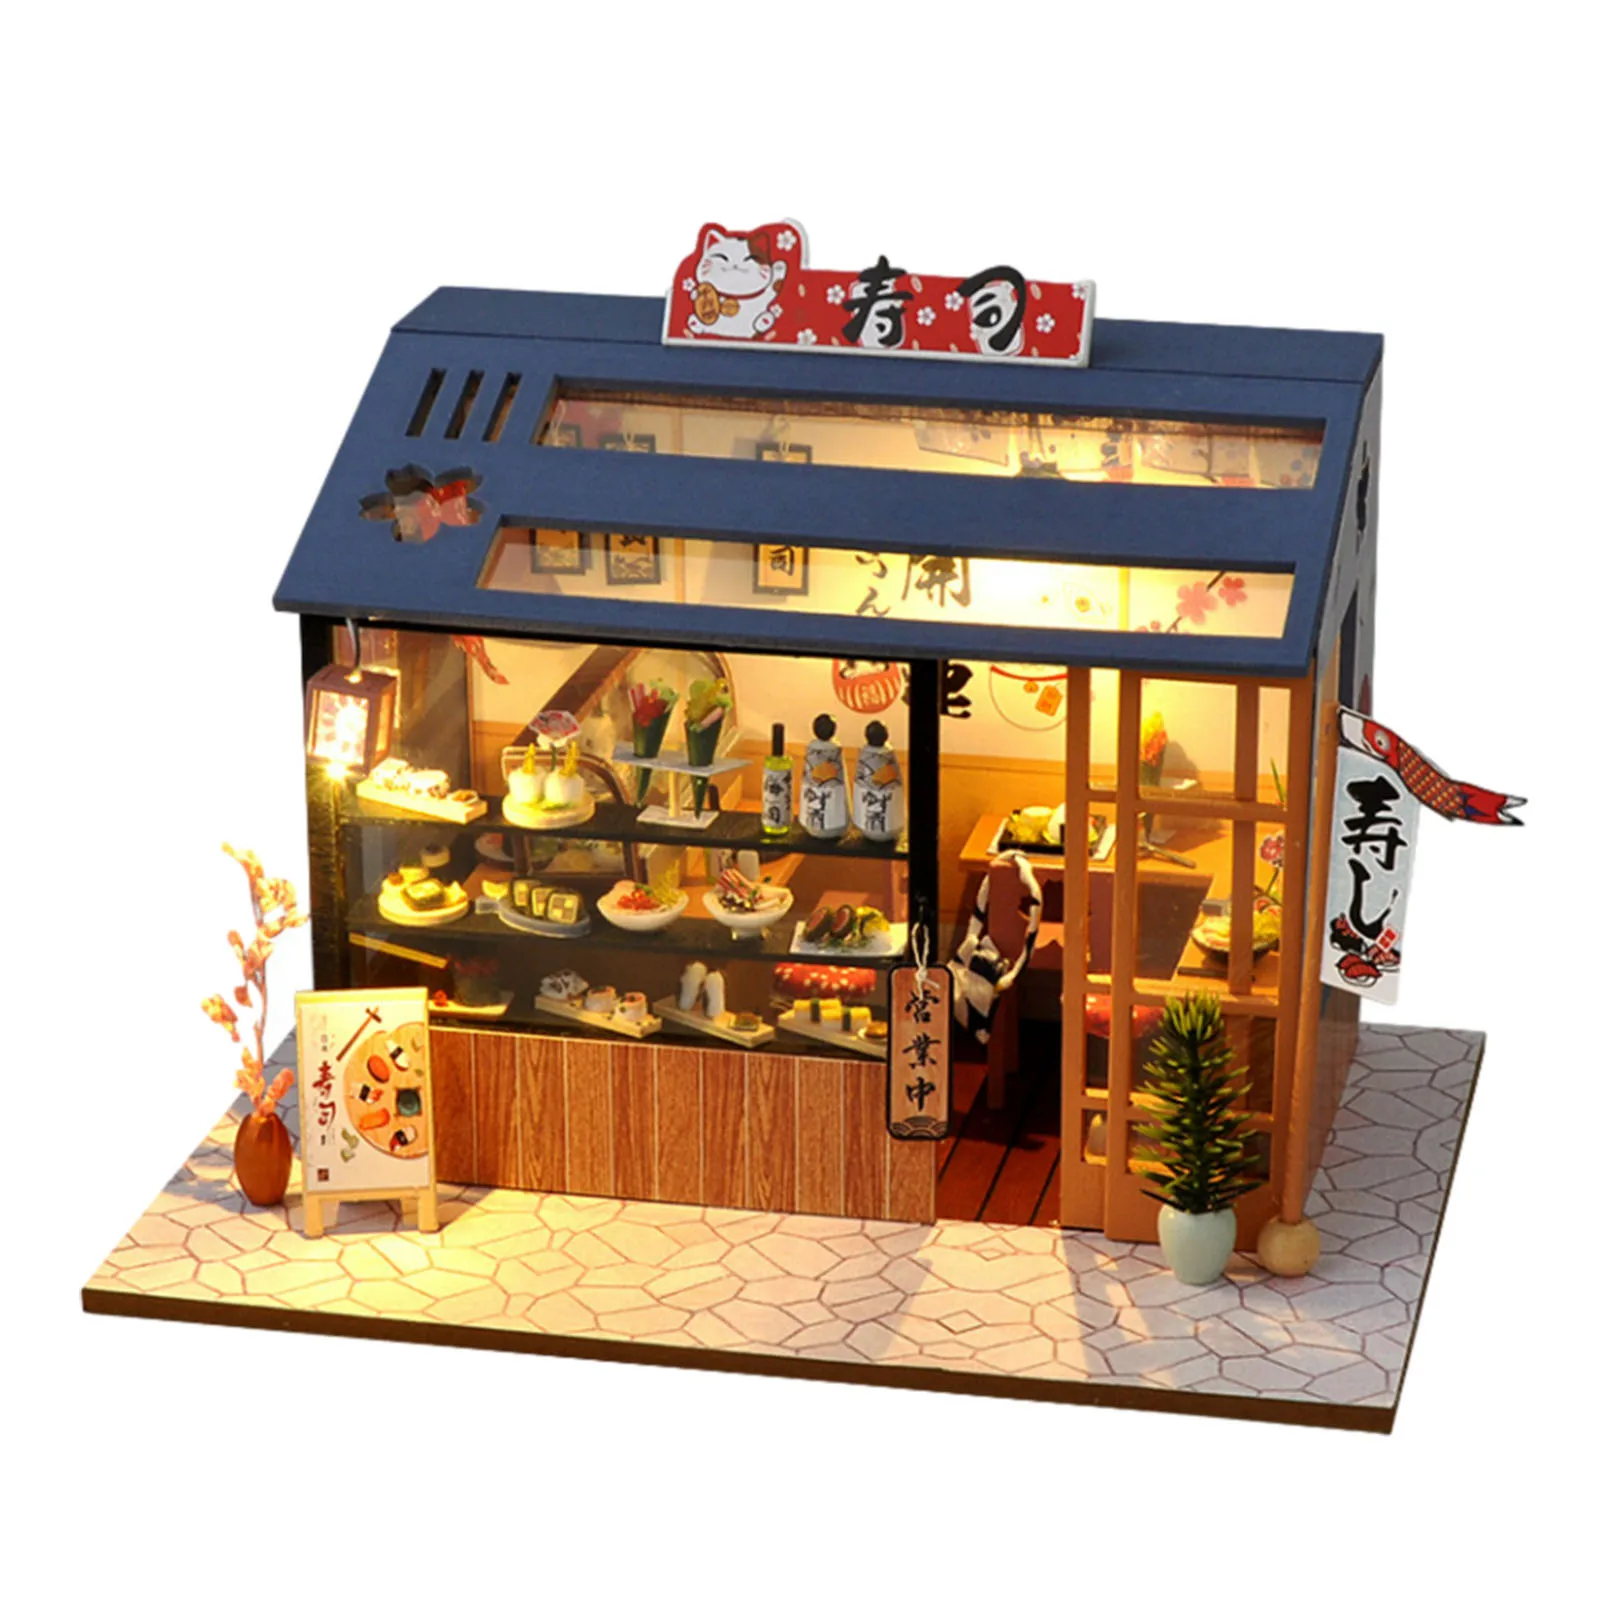 Japanese Doll House Miniature DIY Dollhouse Simulation Sushi Shop Model Toy Wooden Furnitures Children Toy Dollhouse Accessories track toy baby car toys for babies railway train bridge model wooden accessories